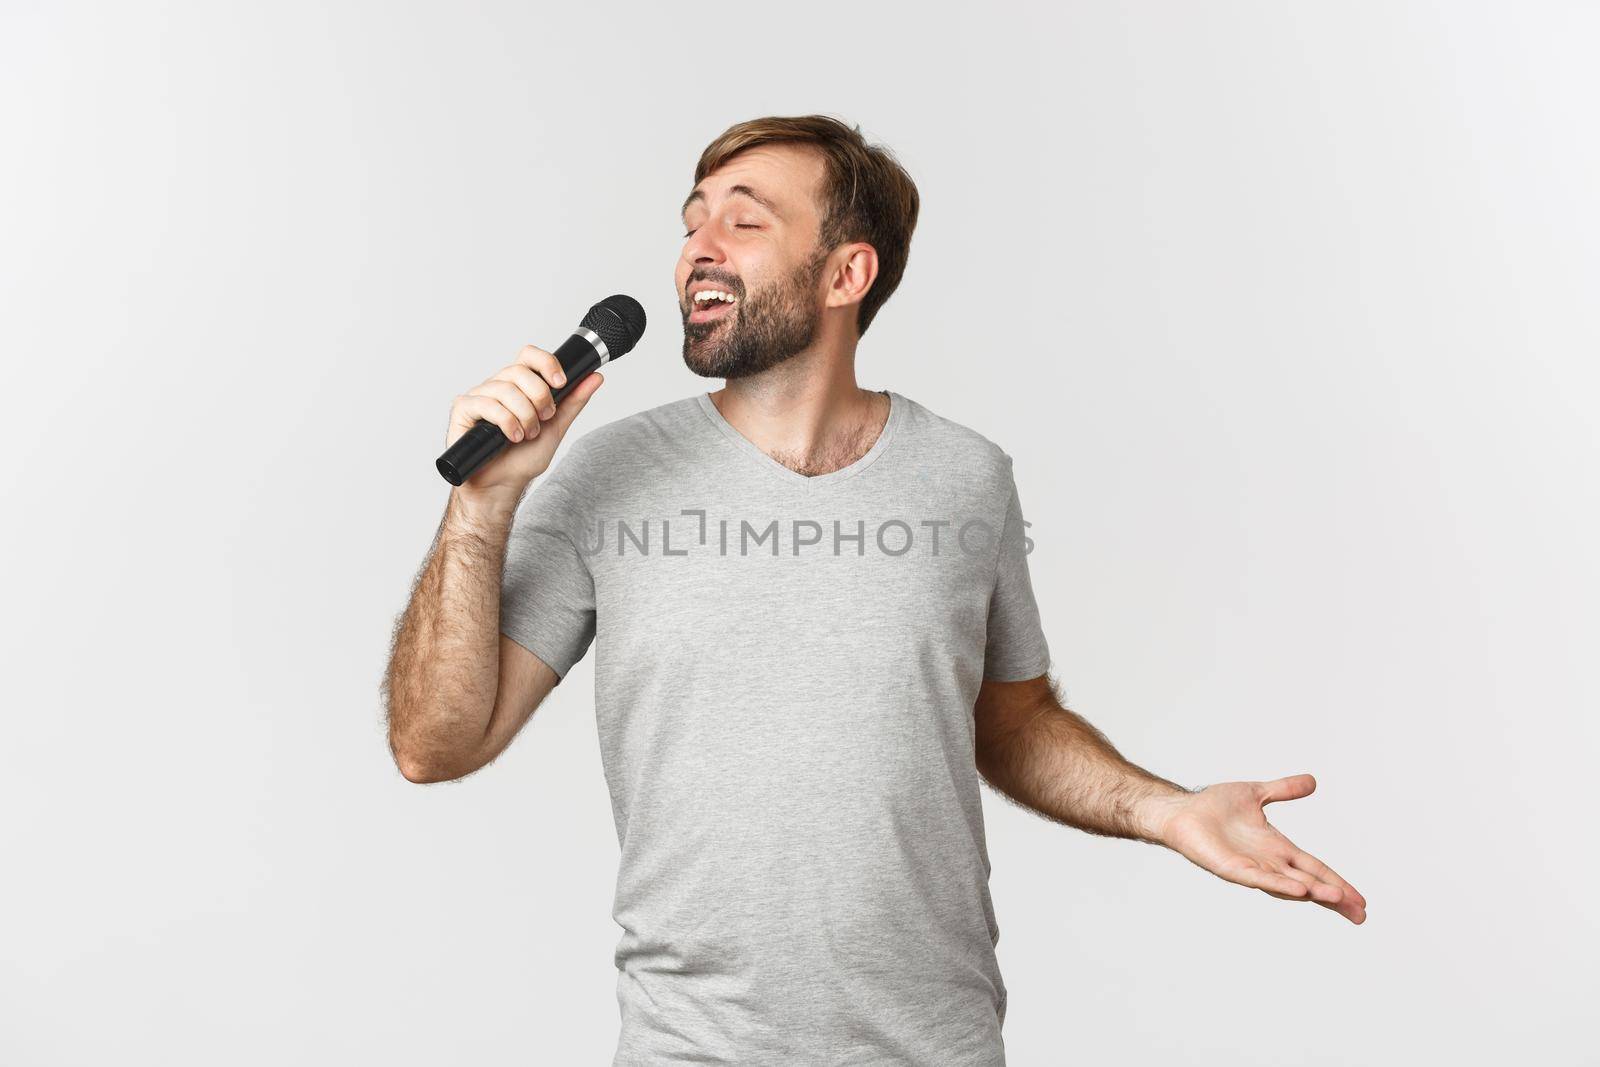 Handsome carefree guy singing song in karaoke, holding microphone, standing over white background.